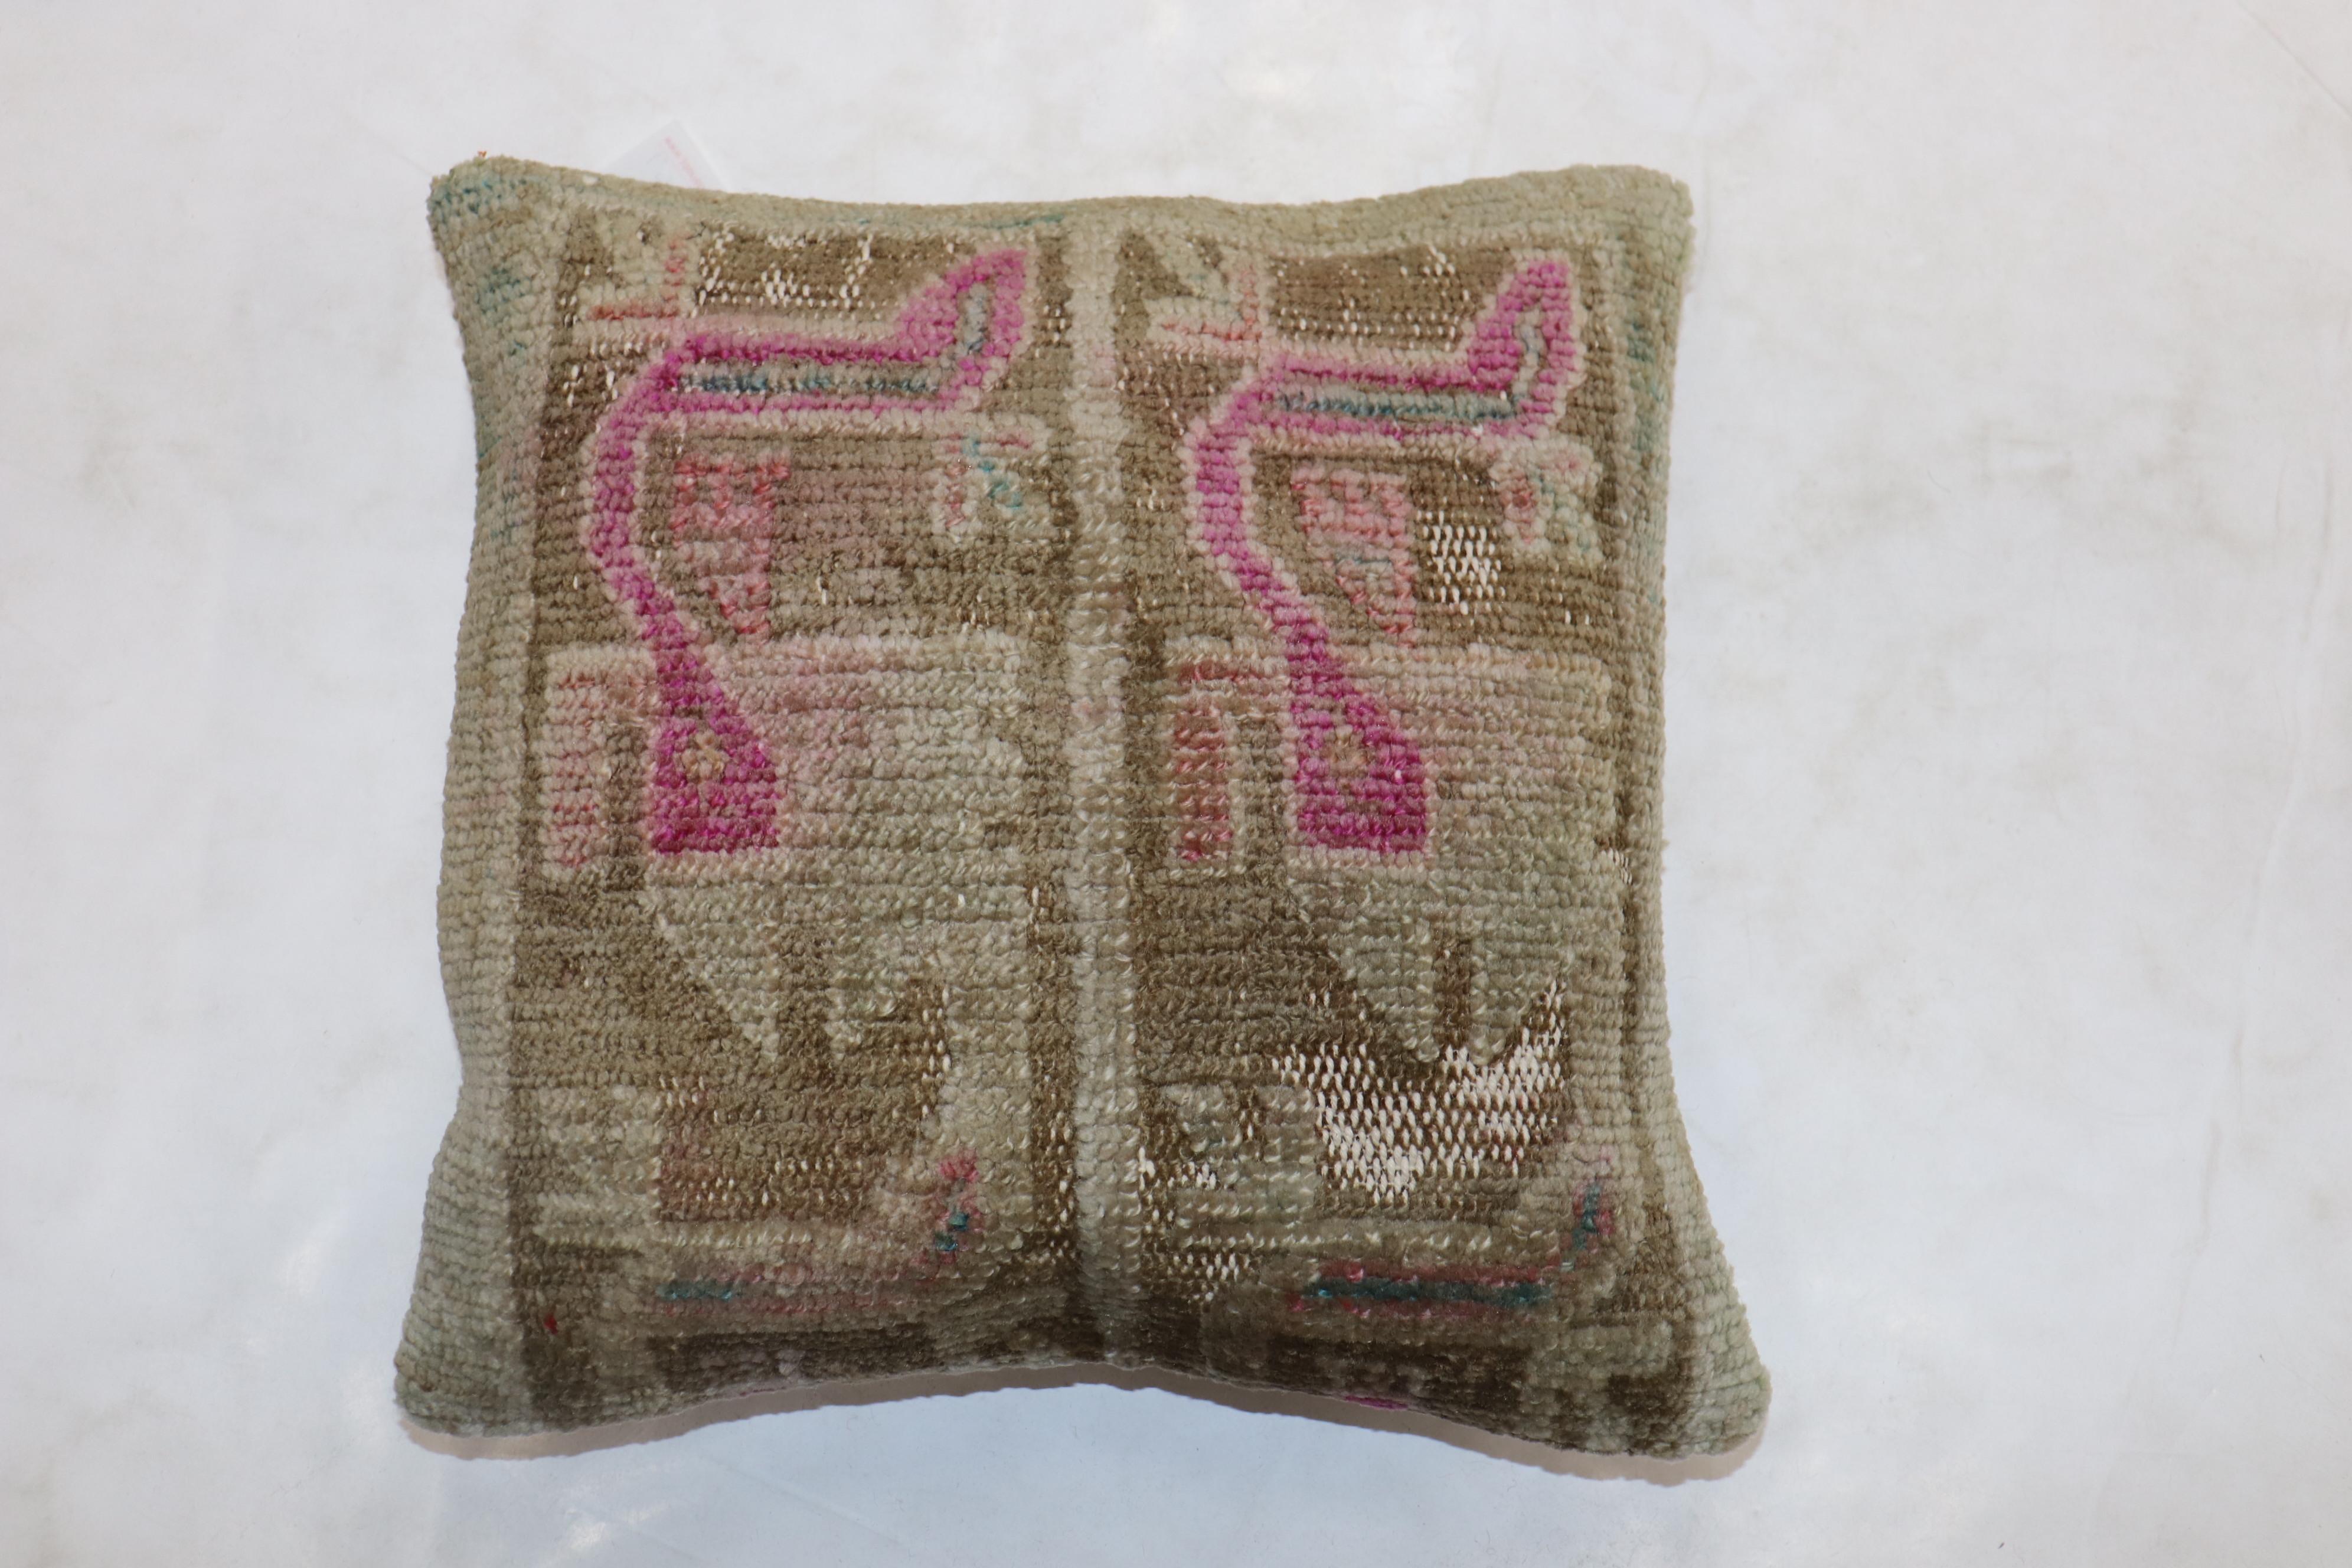 Pillow made from a mid 20th century Turkish rug

Measures: 19'' x 19''.